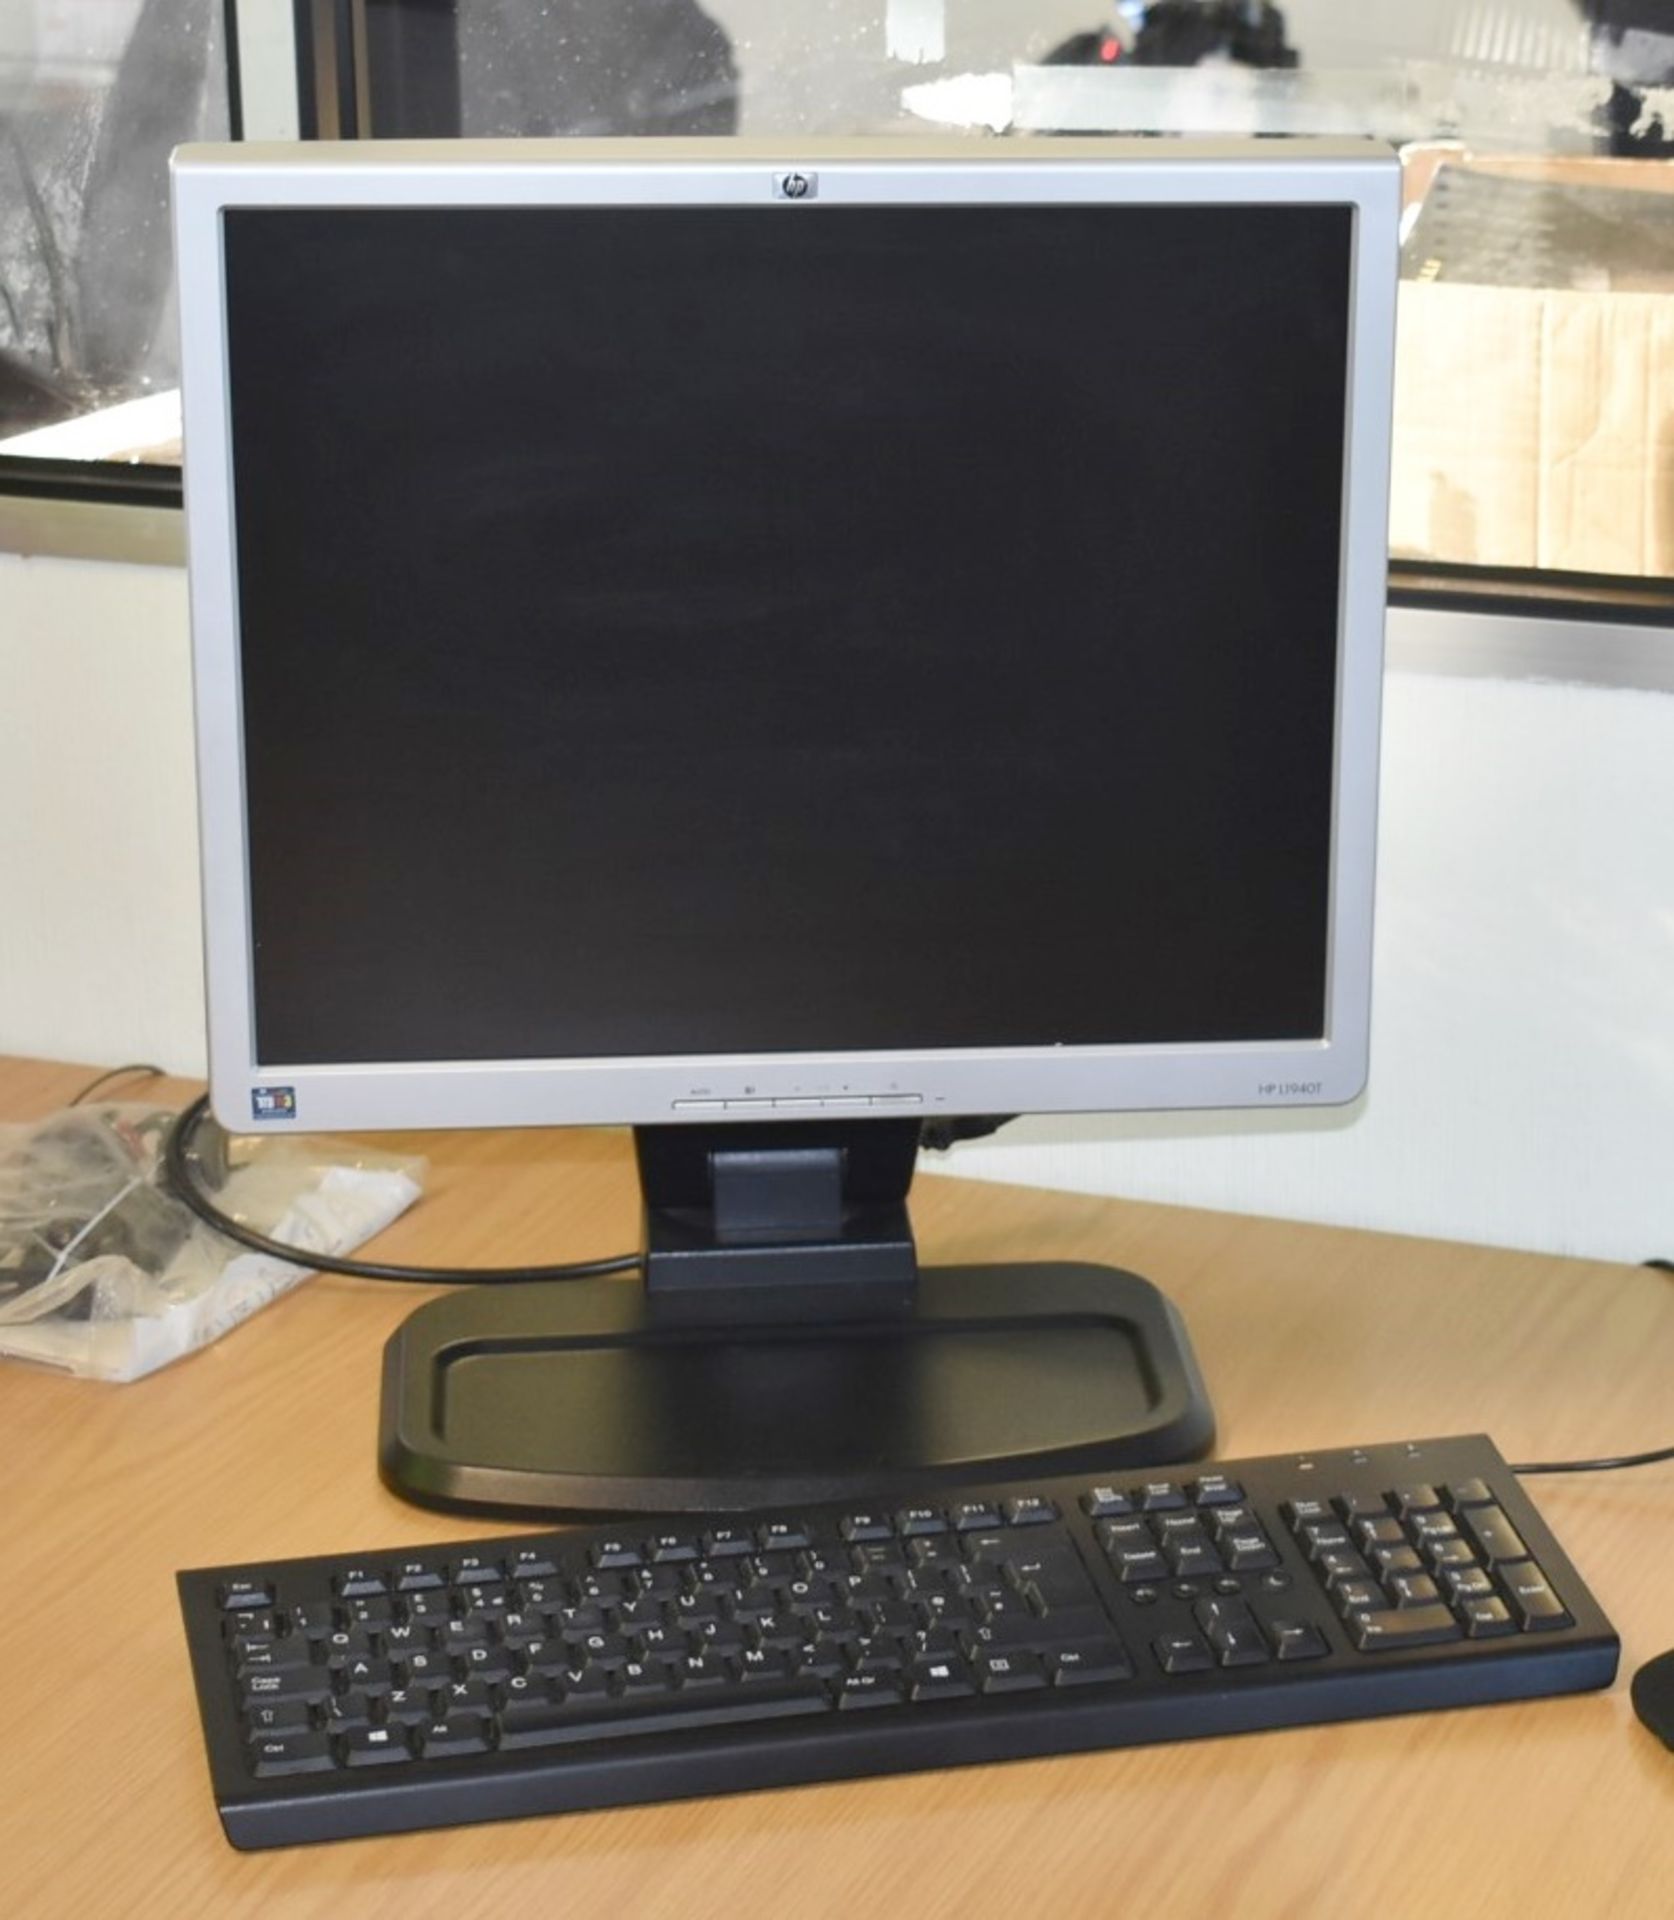 2 x PC Monitors - HP L1940T And Samsung Syncmaster 913v - Ref: C235 - CL816 - Location: Birmingham, - Image 2 of 2